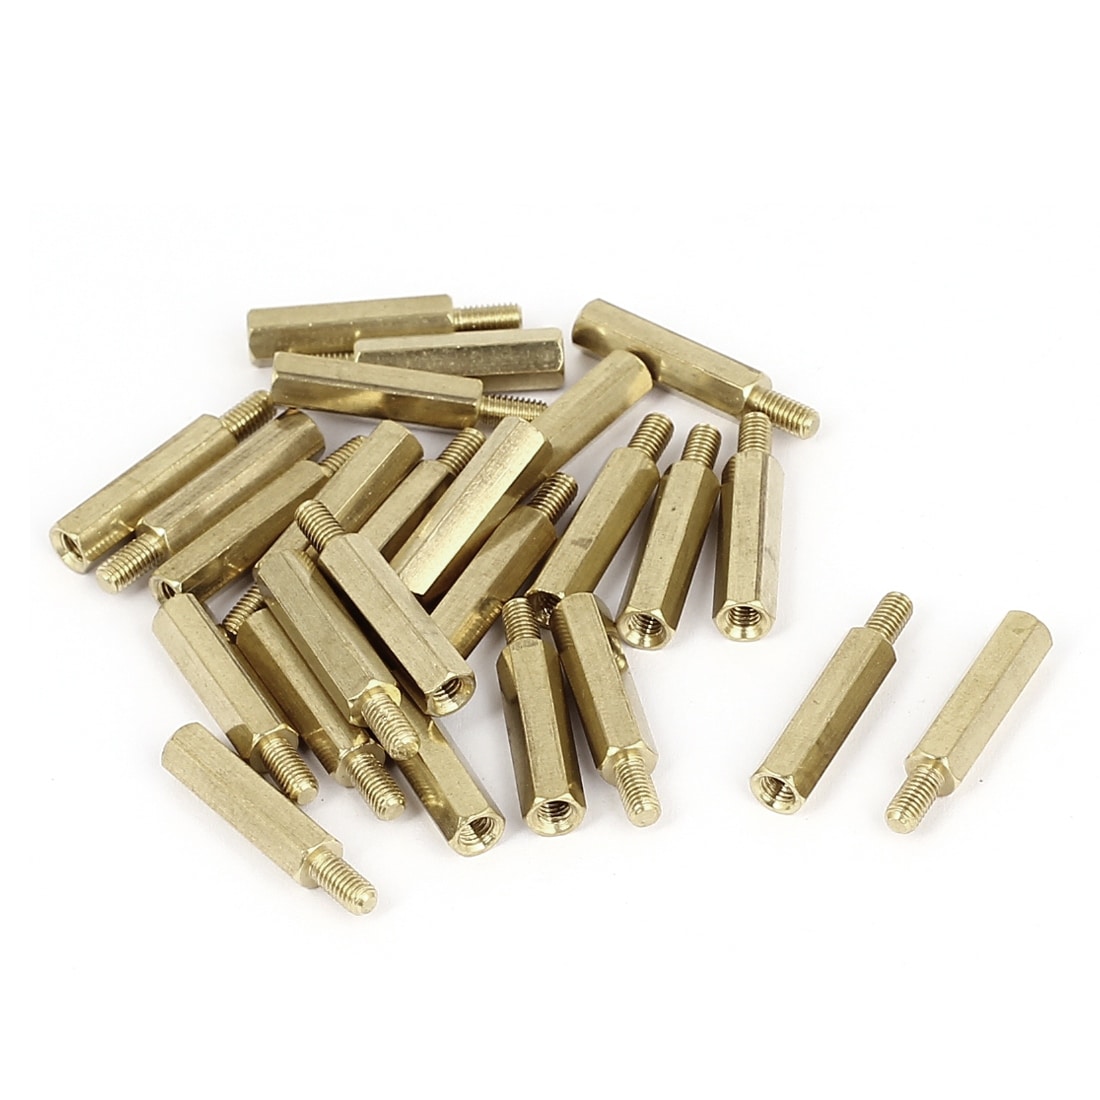 6mm M3 Good Quality 25 pcs New Brass Hex Stand-Off Pillars Male to Female 6mm 